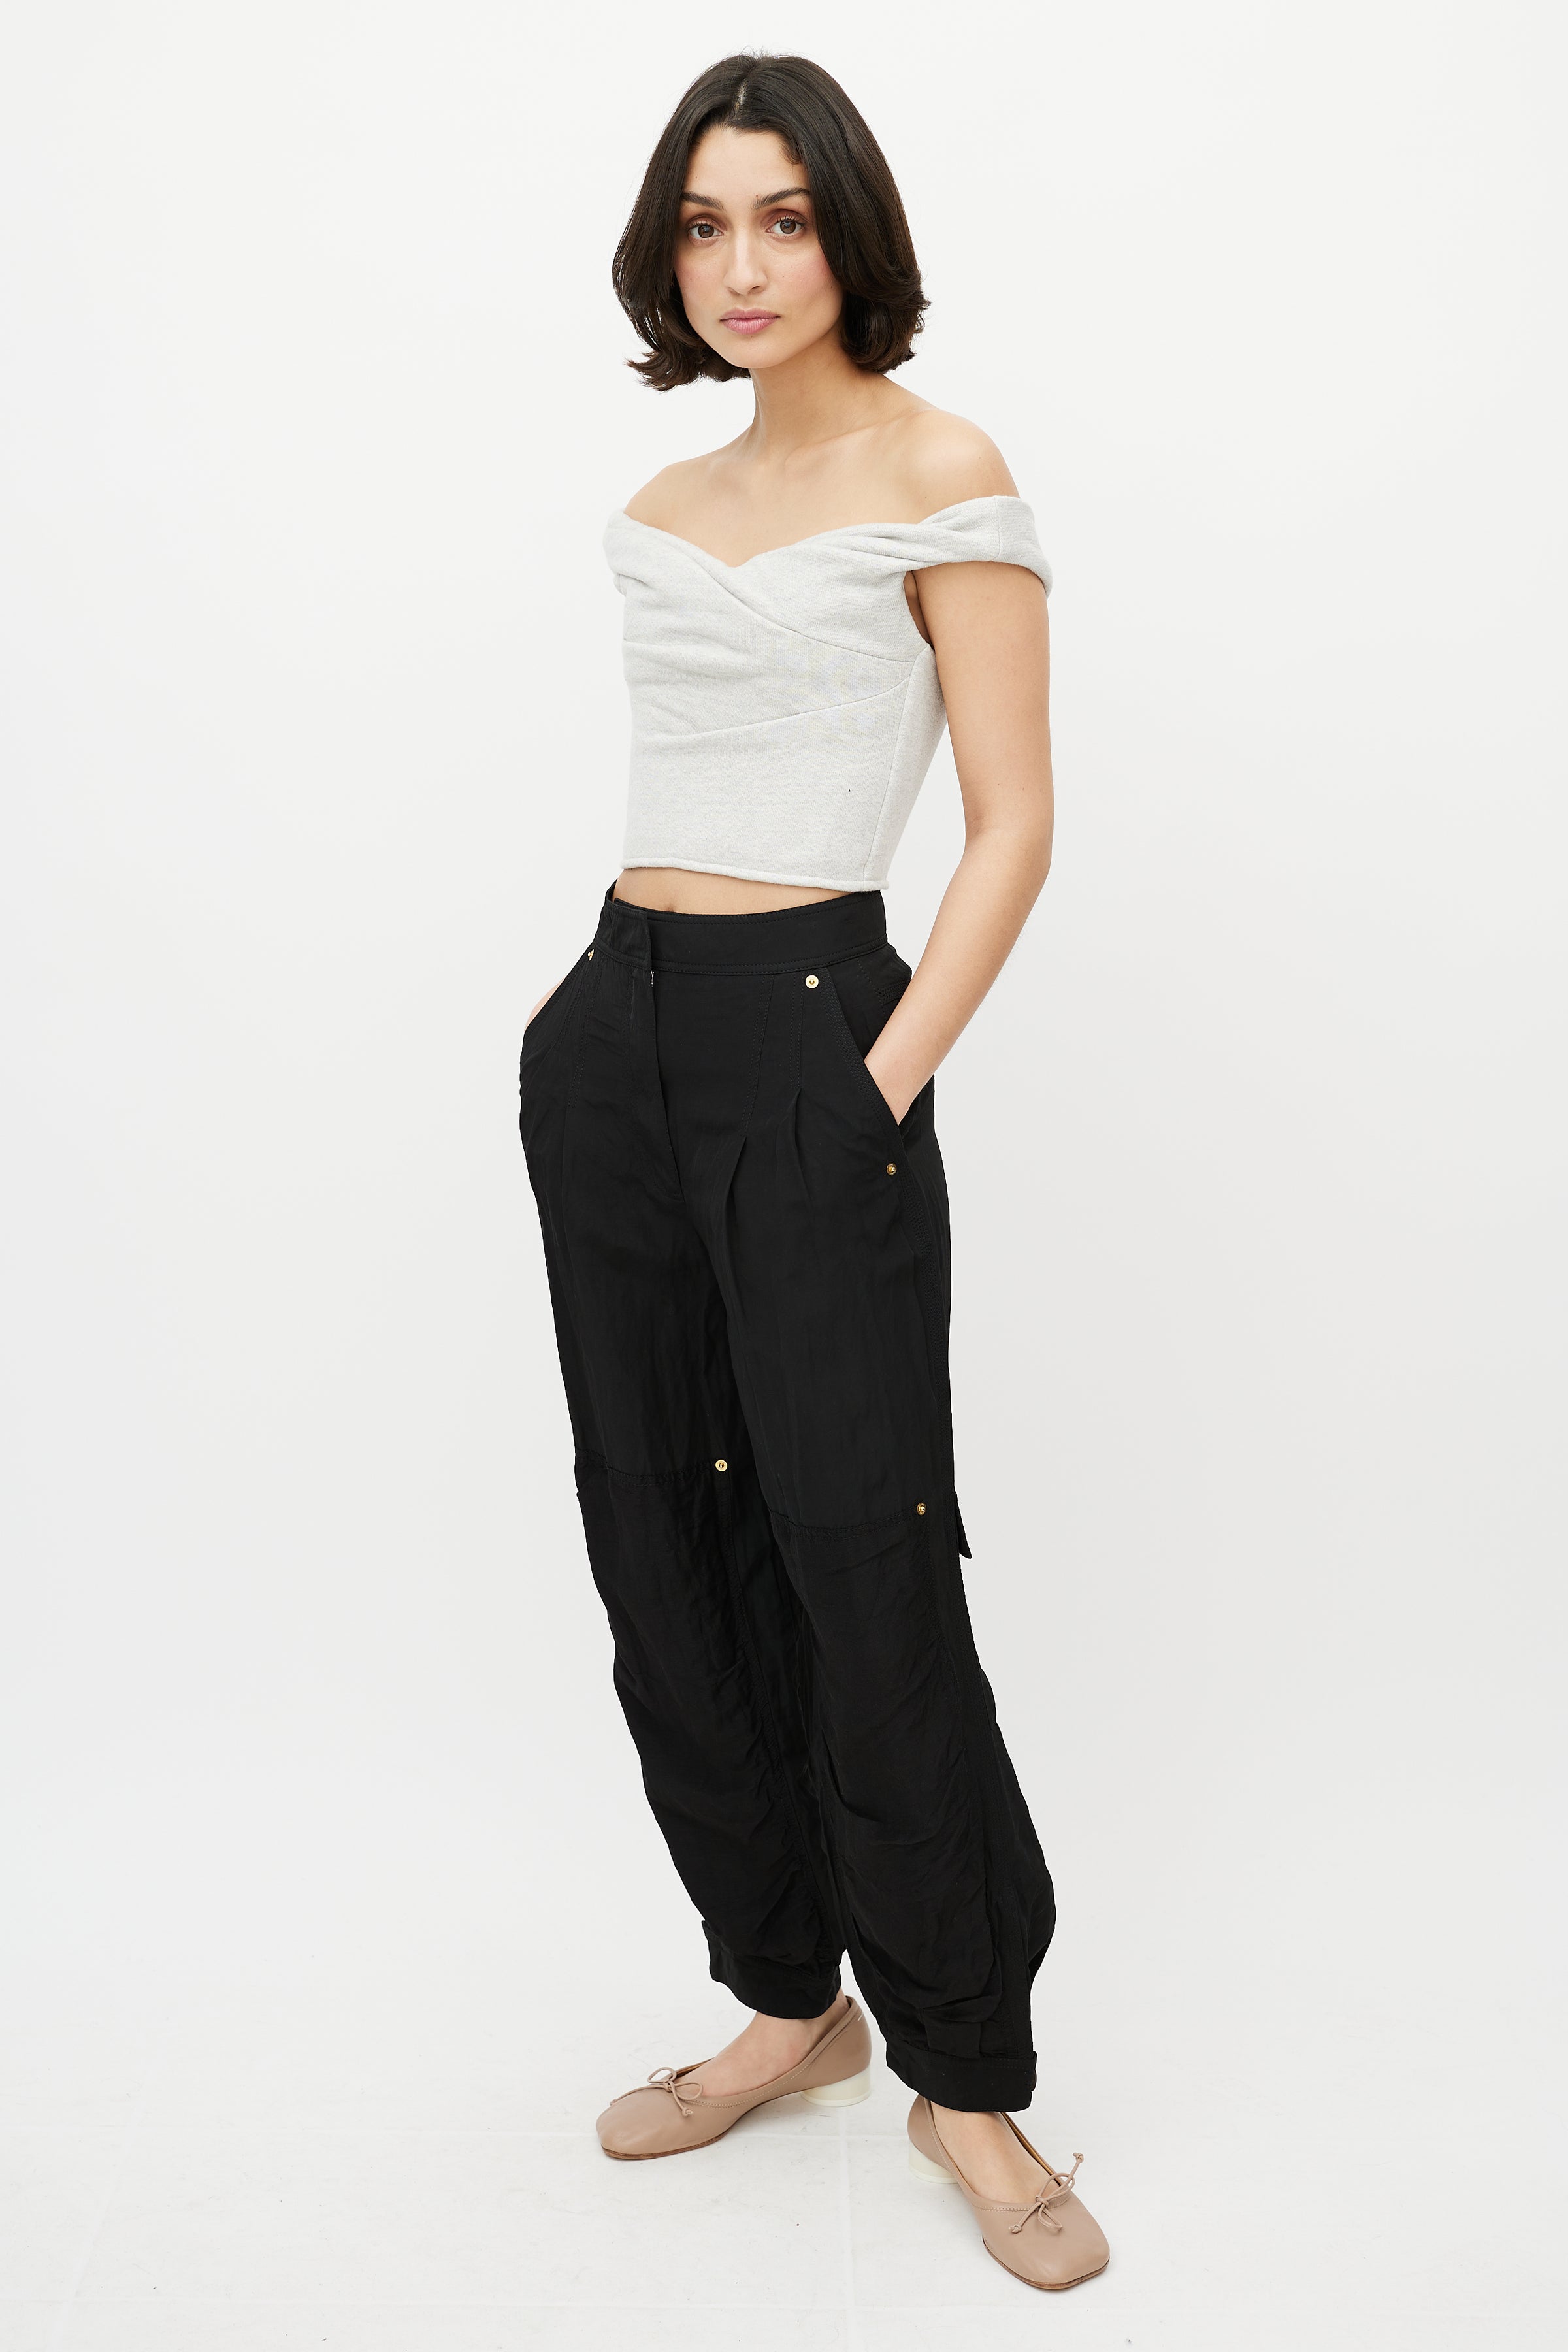 Vintage High Waist Cargo Pants For Men And Women Casual Baggy Overalls With  Wide Leg And Straight Style Y2K Streetwear Cargo Trousers Women Style  230104 From Jiao02, $21.05 | DHgate.Com